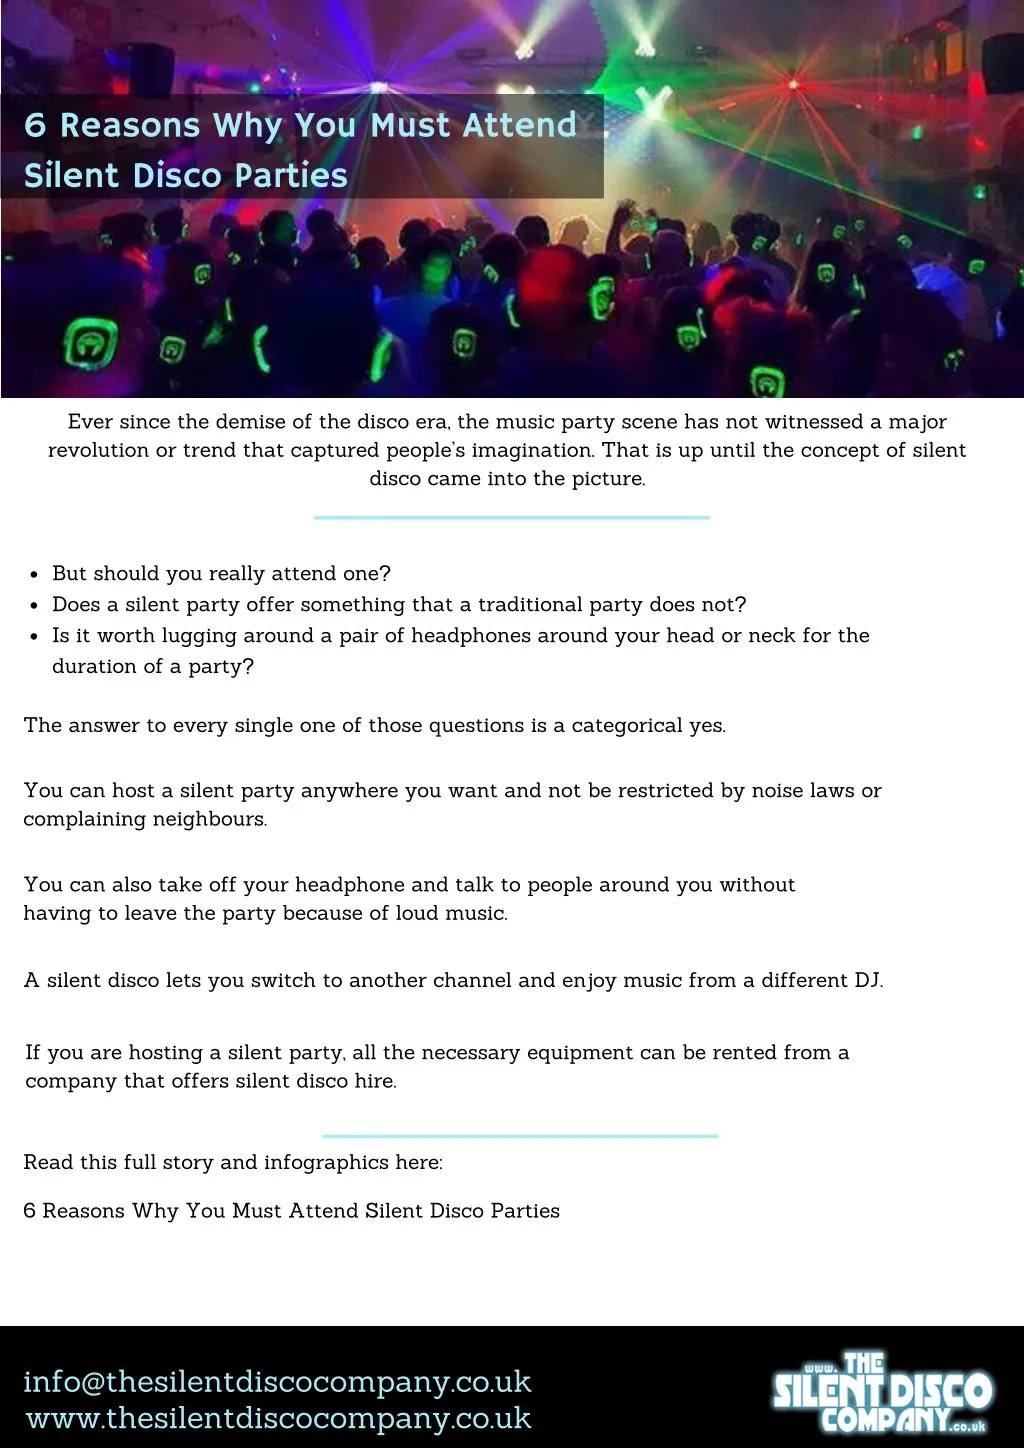 6 reasons why you must attend silent disco parties